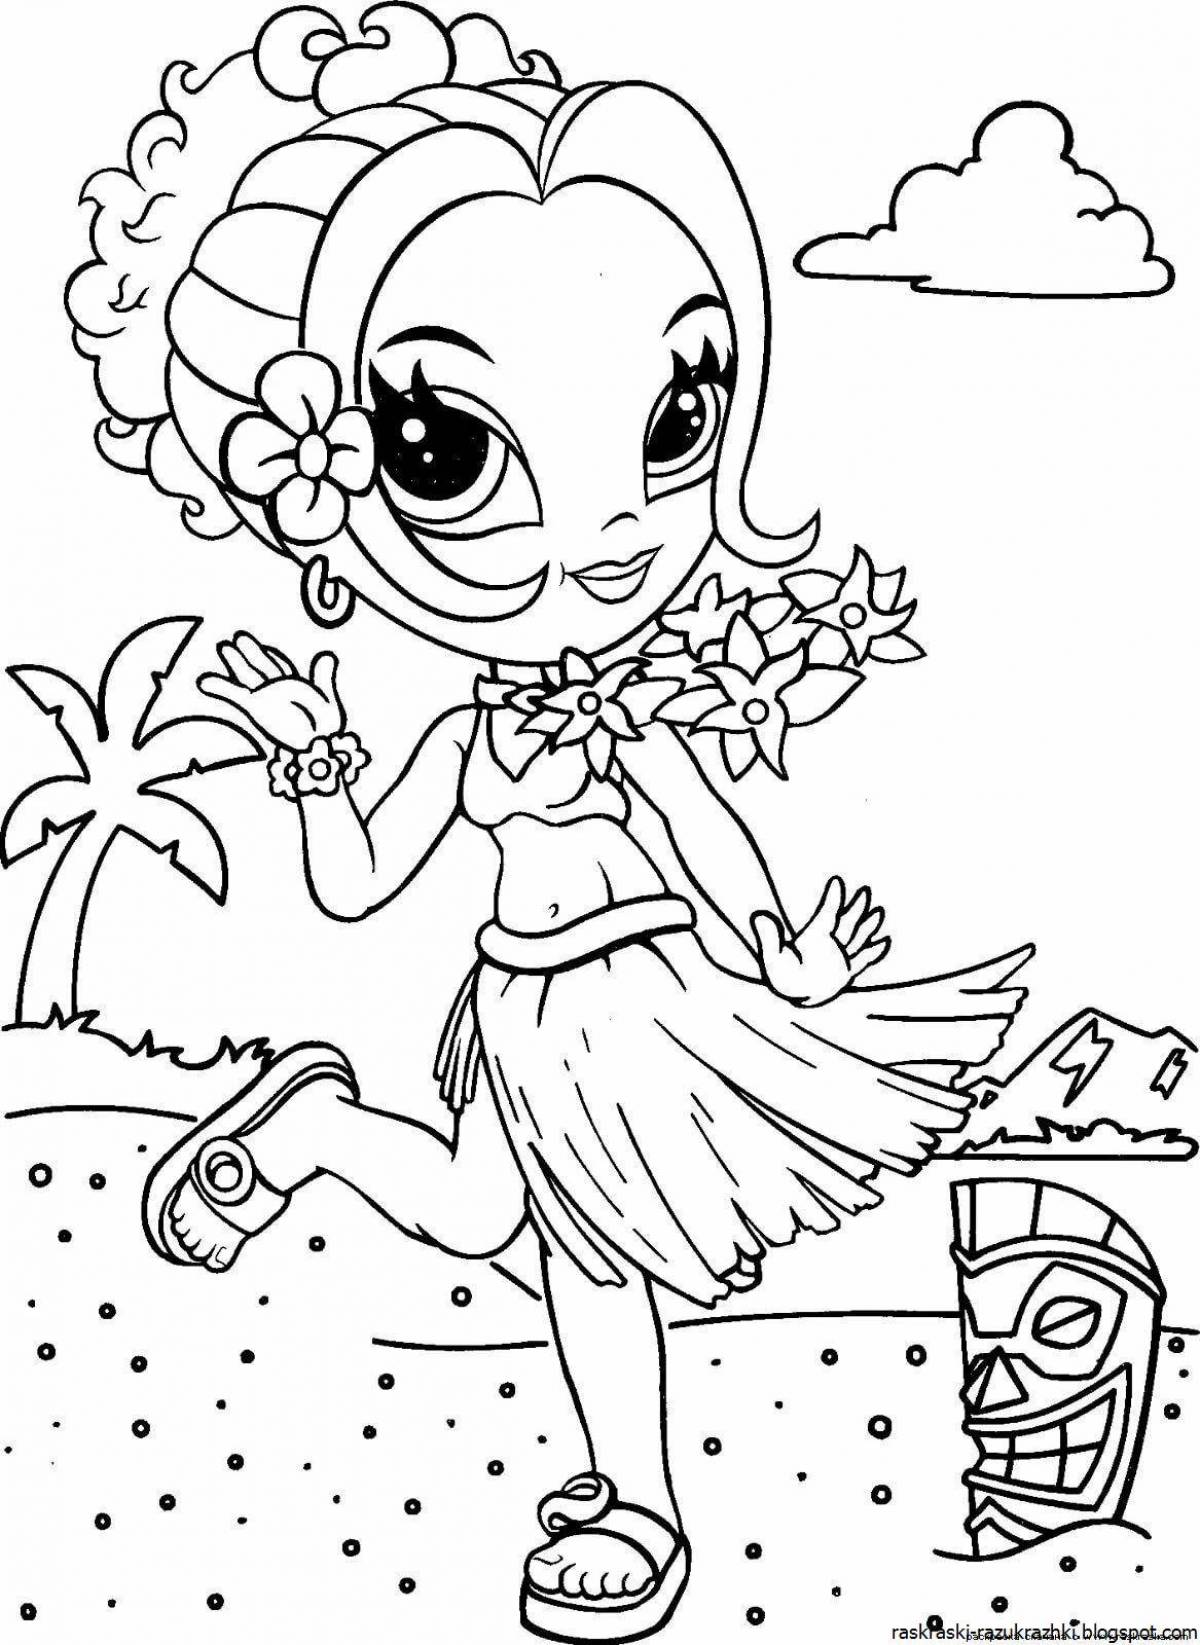 A fascinating coloring book for girls 6 years old